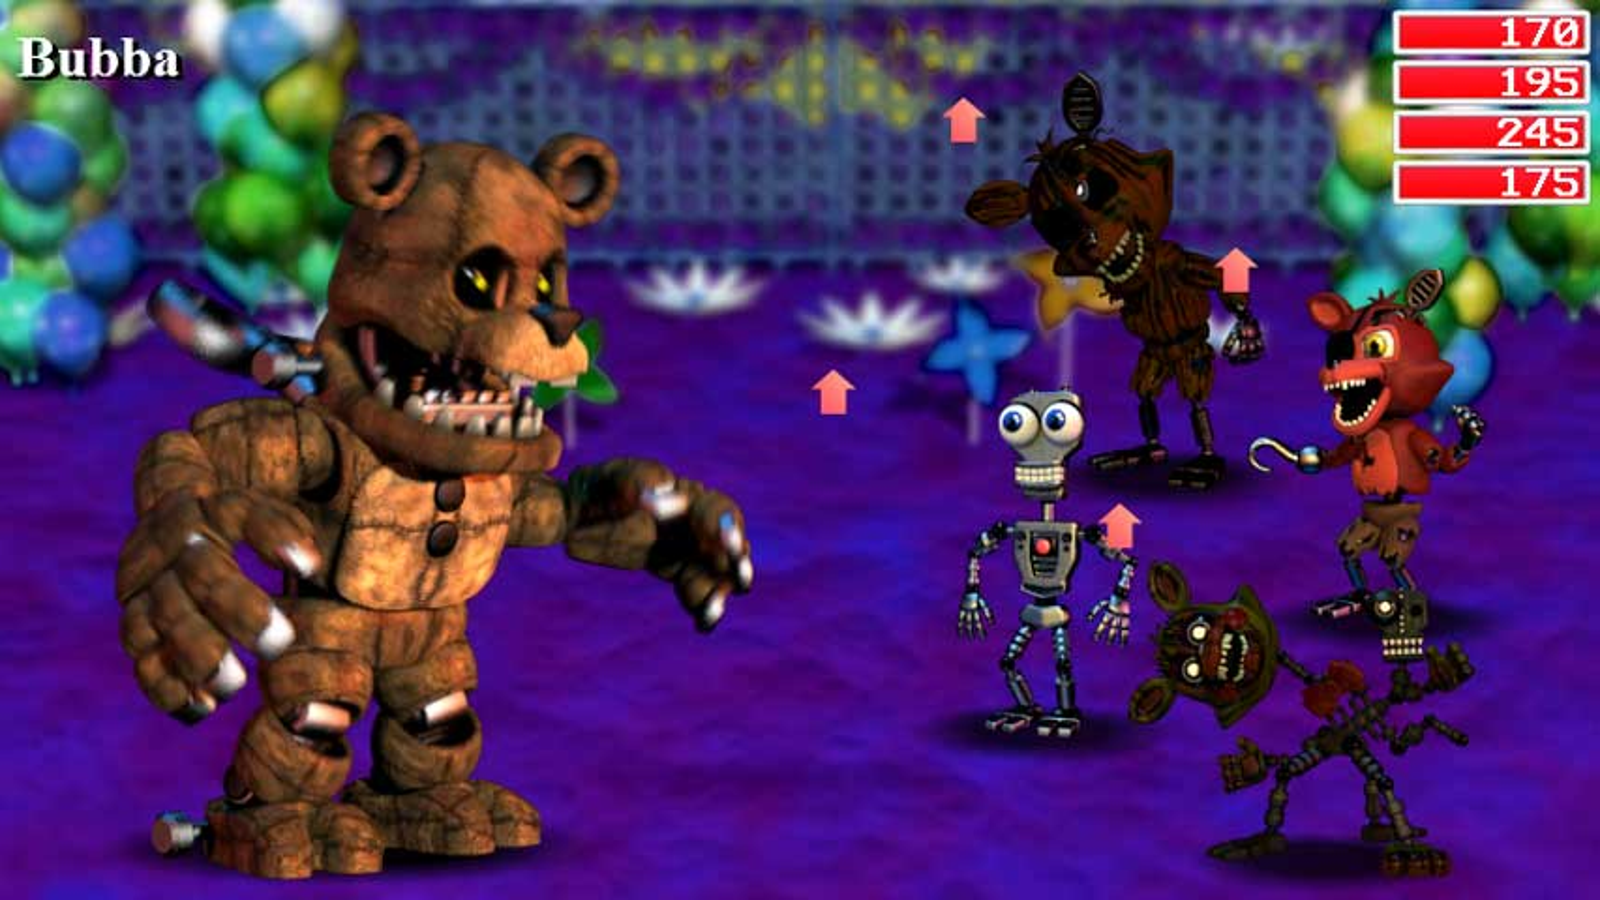 FNaF World released too early, Five Nights at Freddy's creator admits